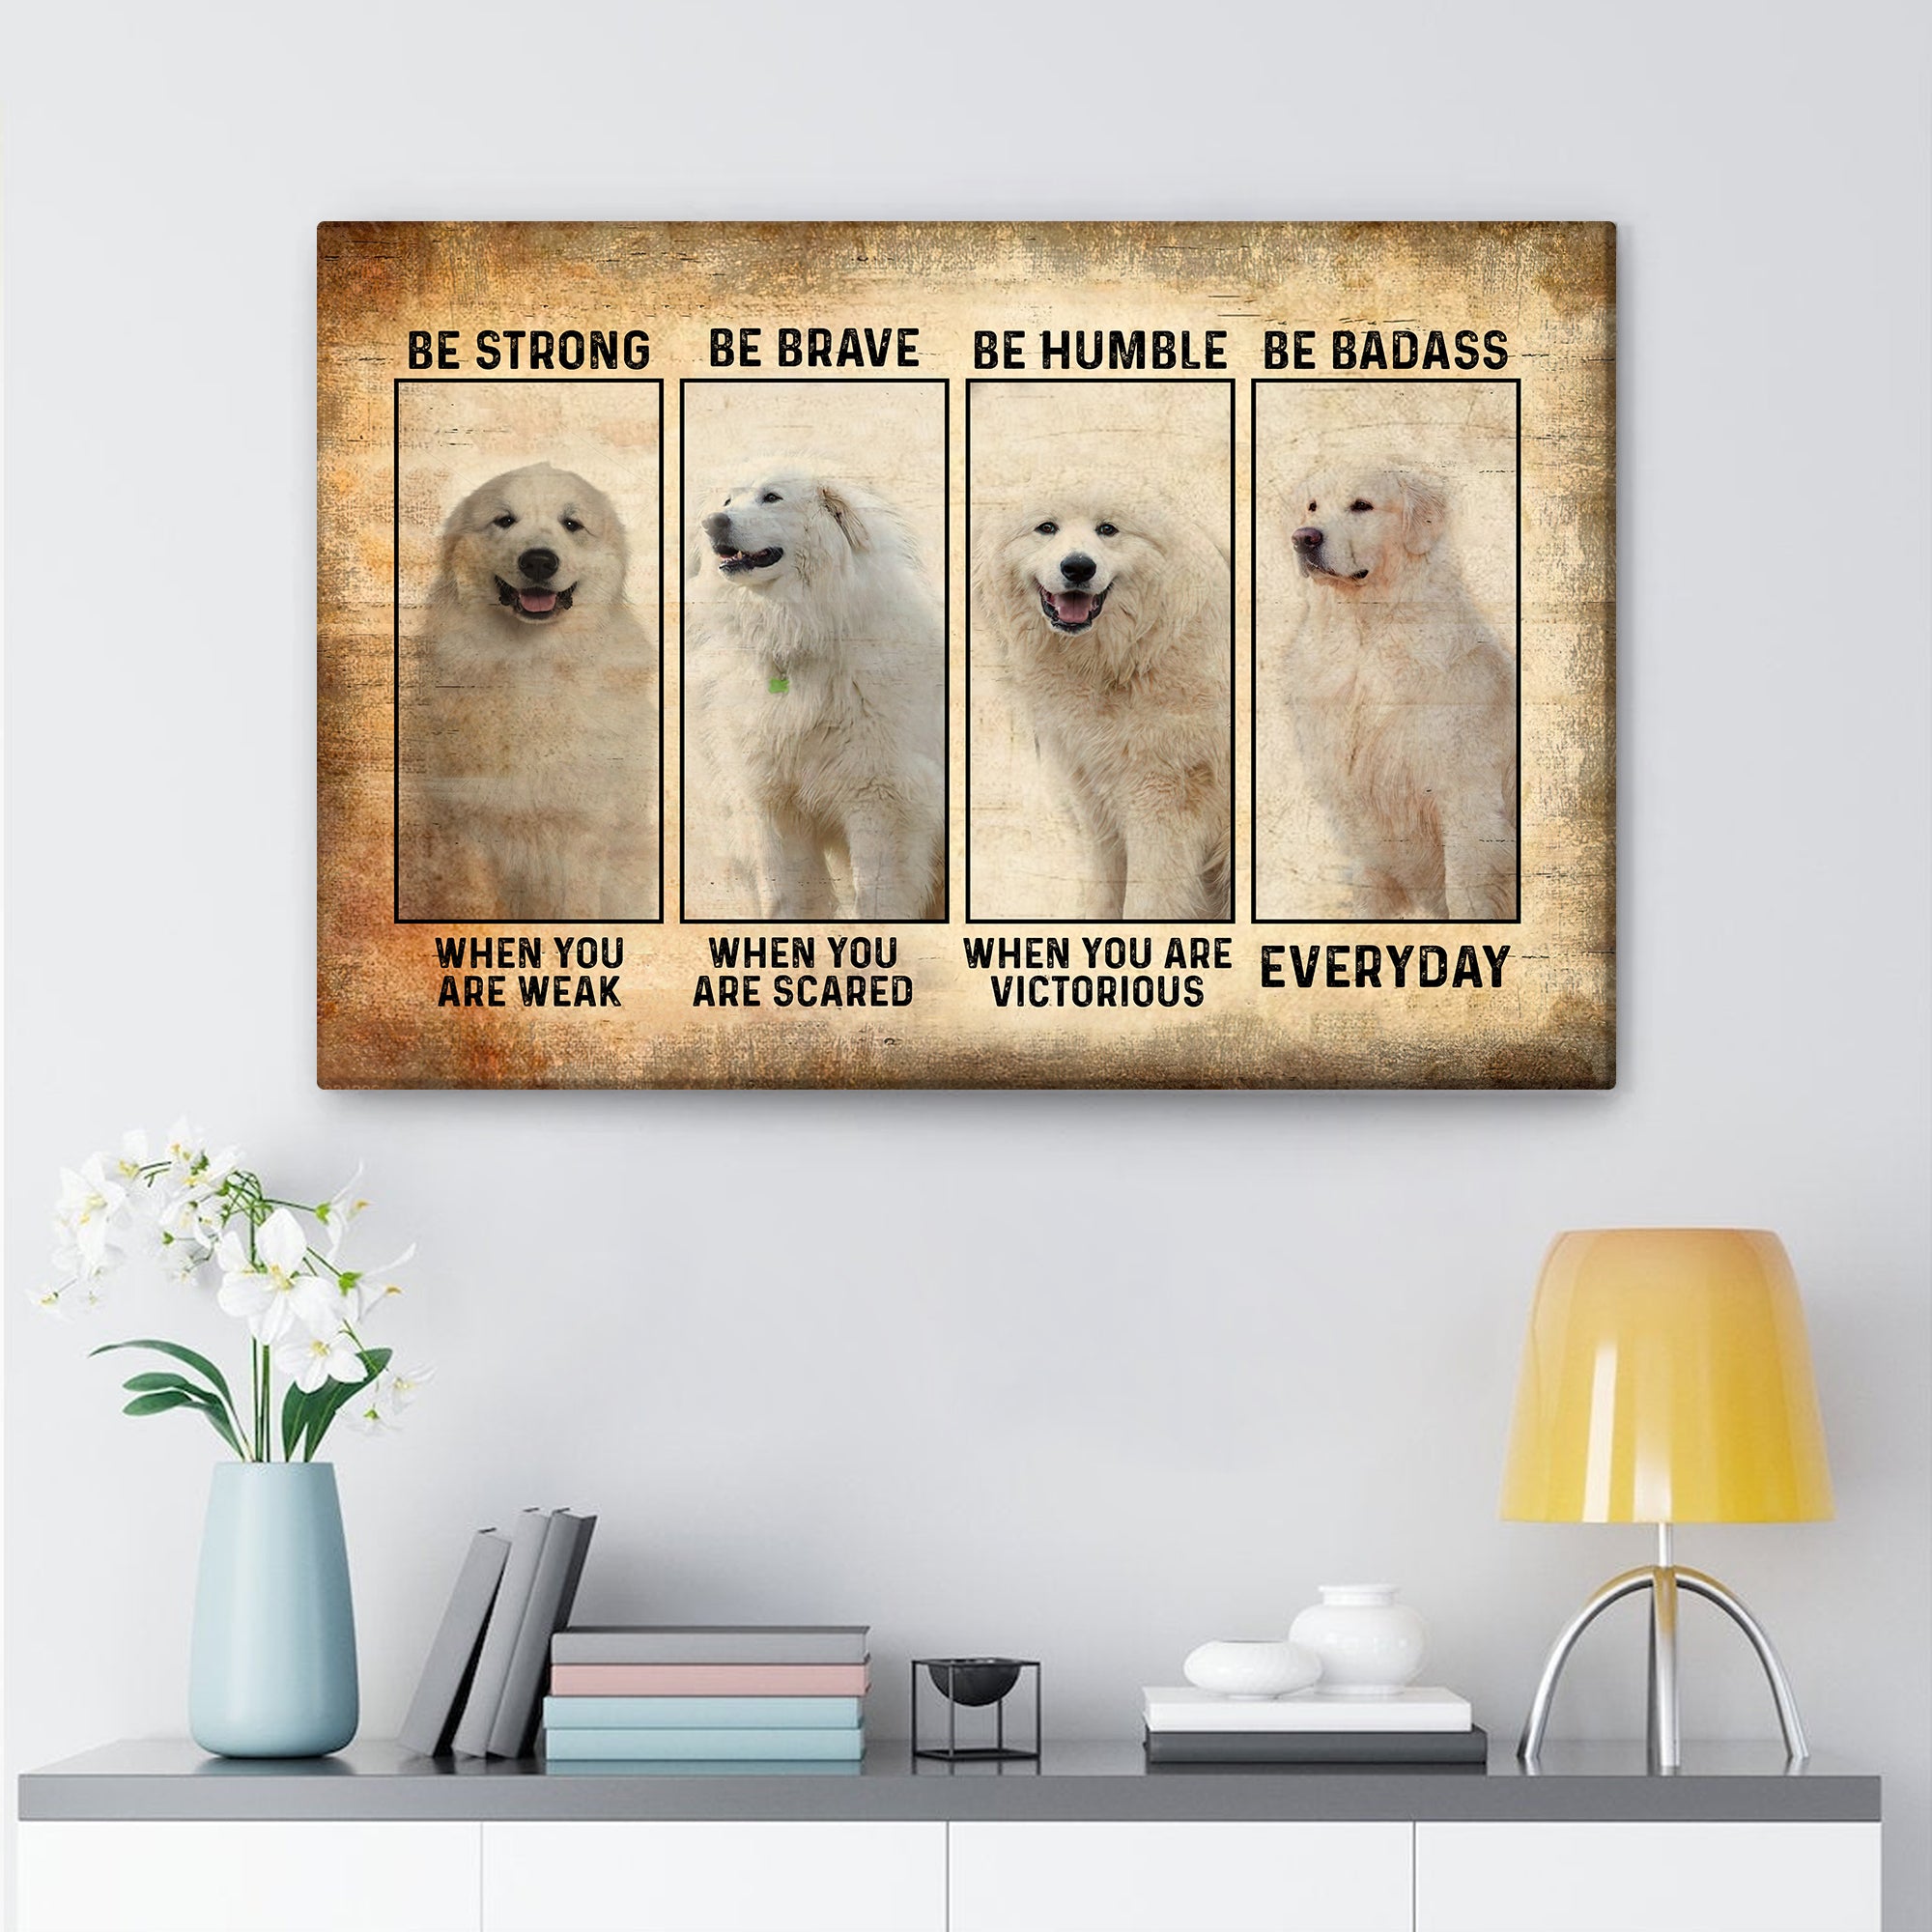 Great Pyrenees Poster & Canvas, Be Strong Be Brave Wall Art, Home Deco -  OhaPrints